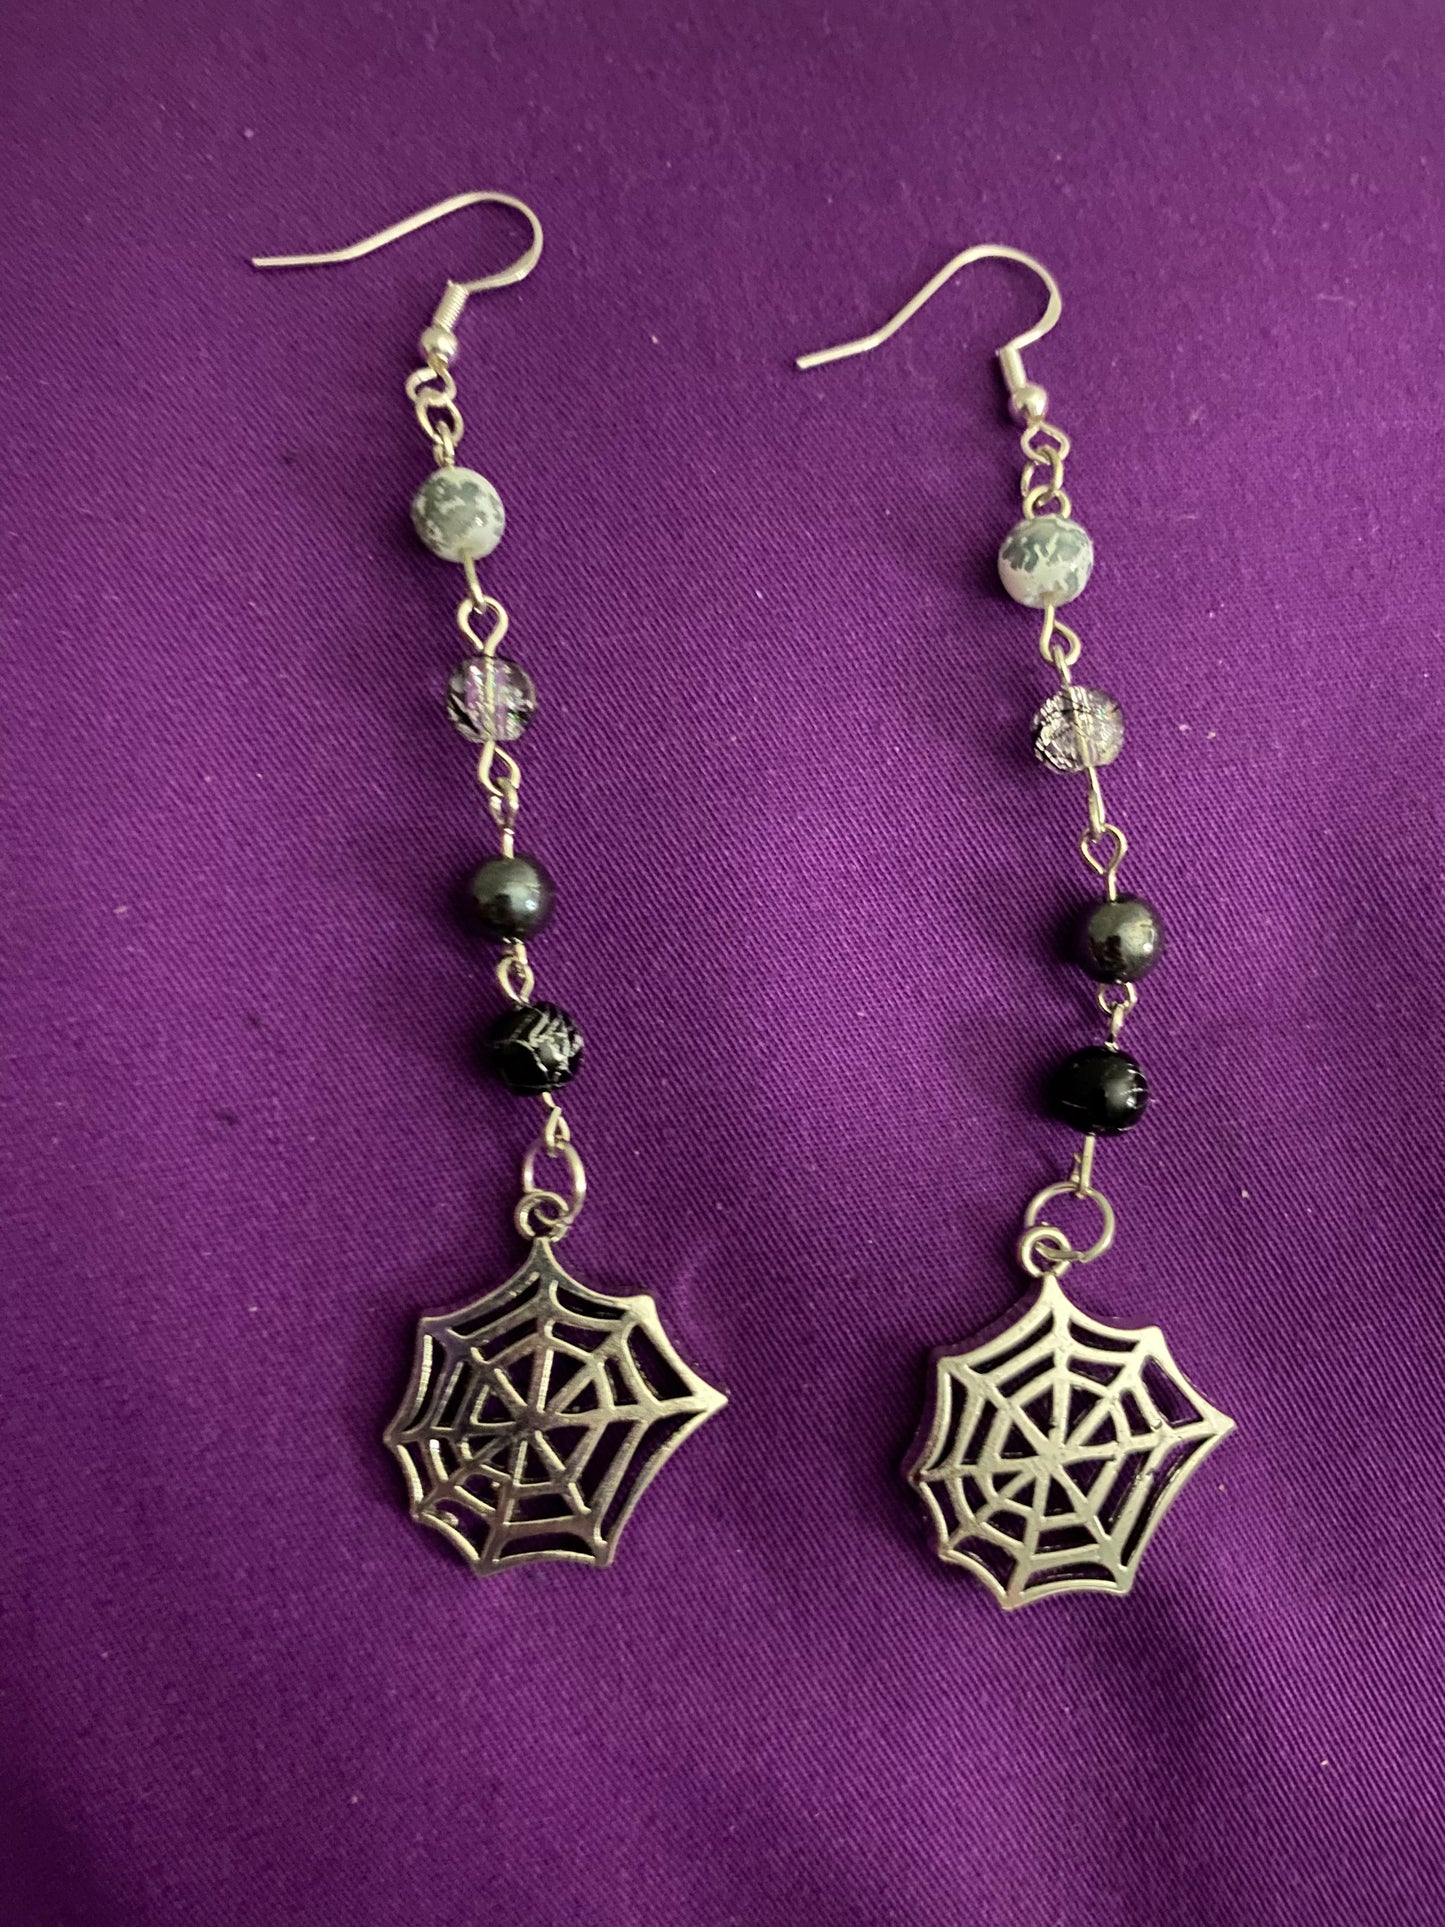 Entity Inspired Earrings: The Web